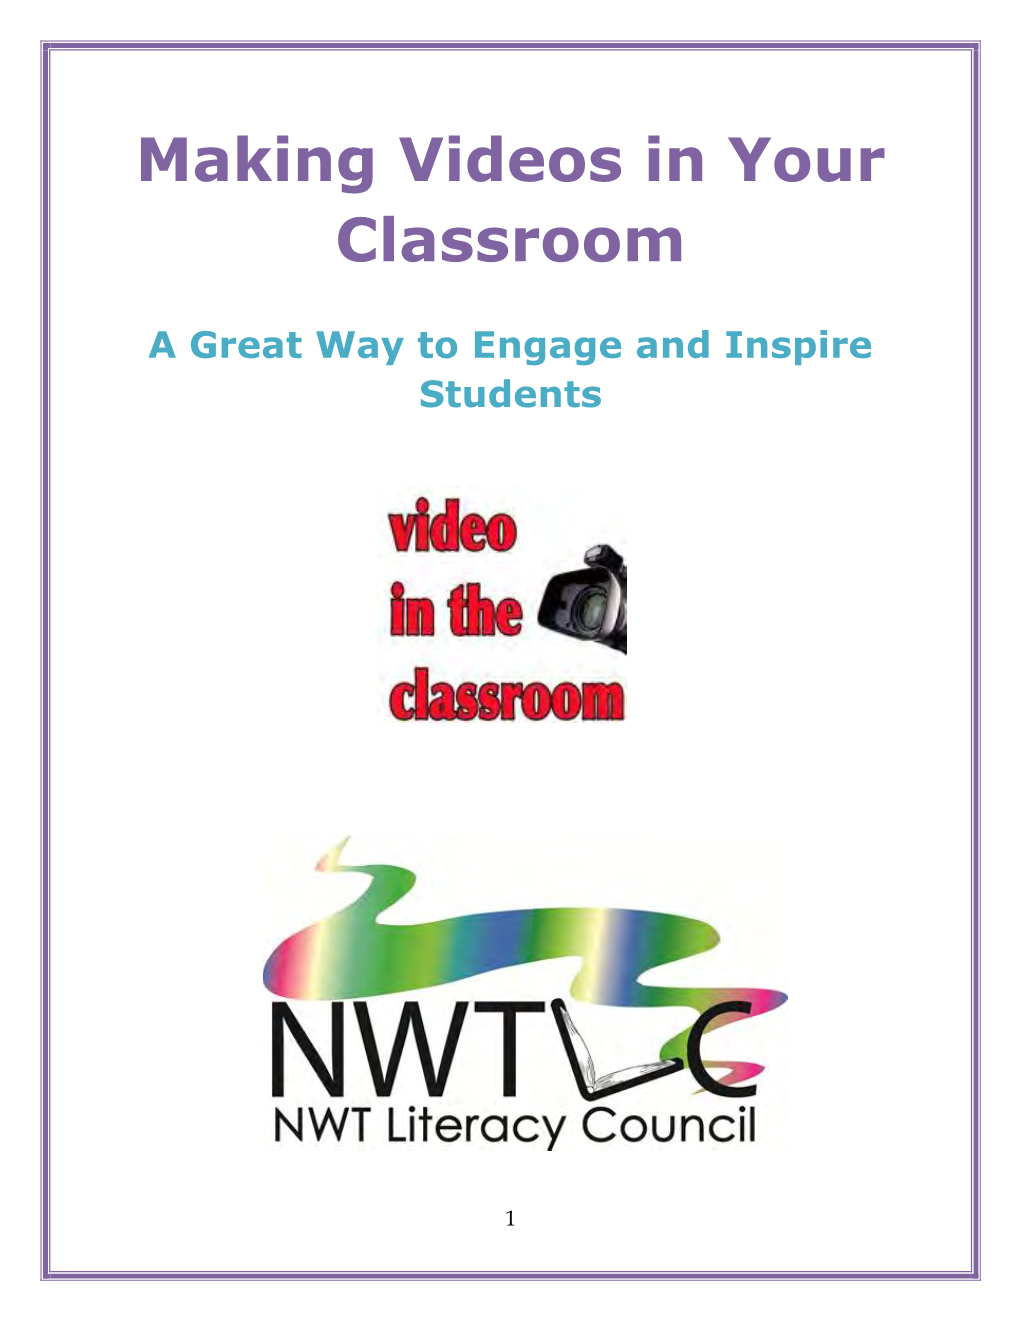 Making Videos in Your Classroom: a Great Way to Engage and Inspire